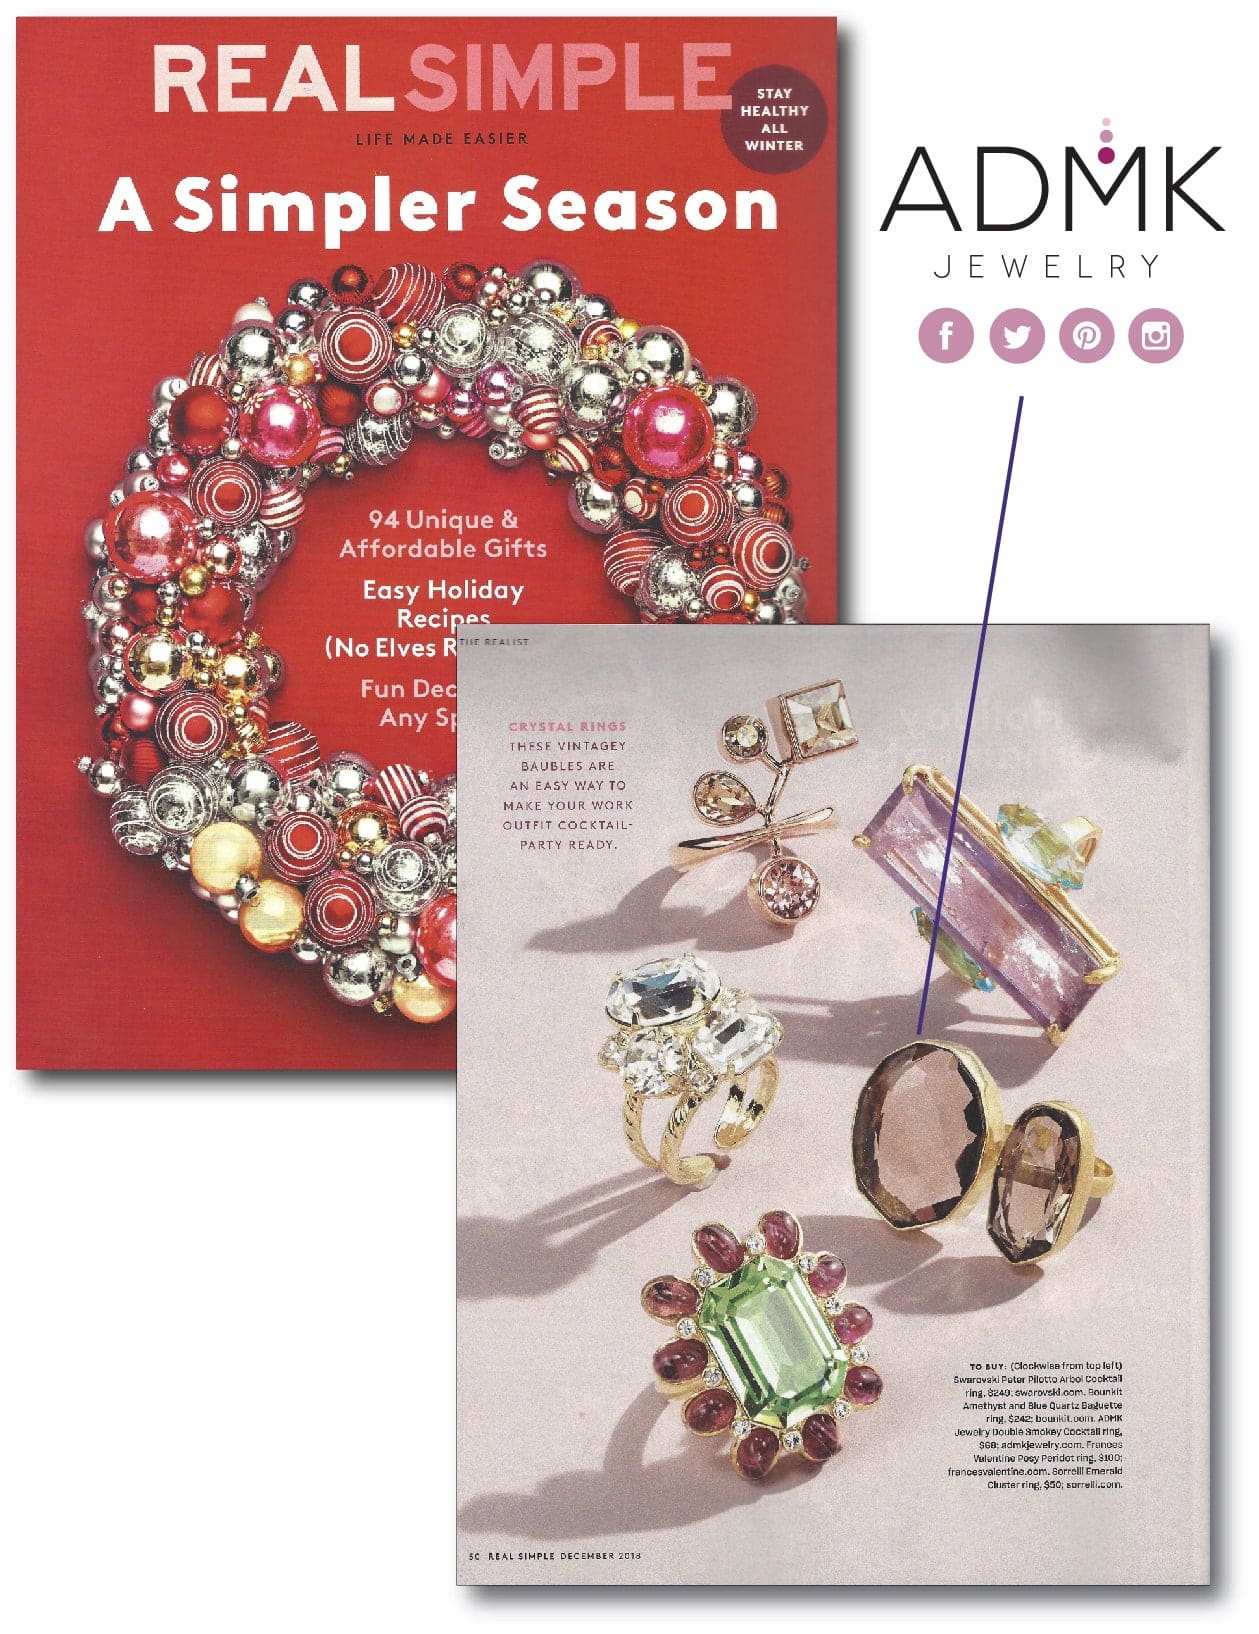 The Jeannie Ring was featured in the Real Simple Magazine